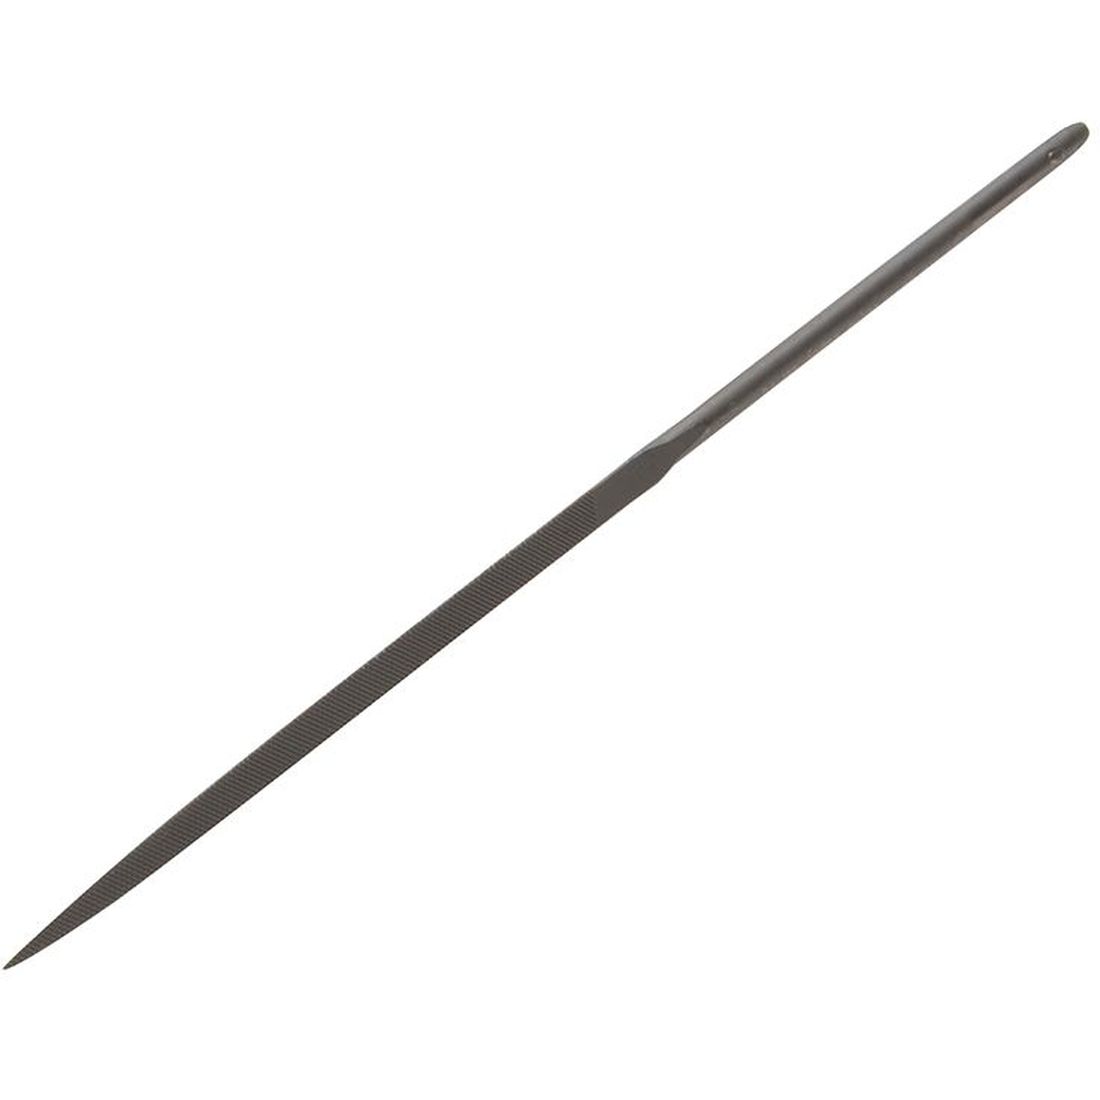 Bahco 2-302-14-2-0 Three-Square Needle File Cut 2 Smooth 140mm (5.5in)                